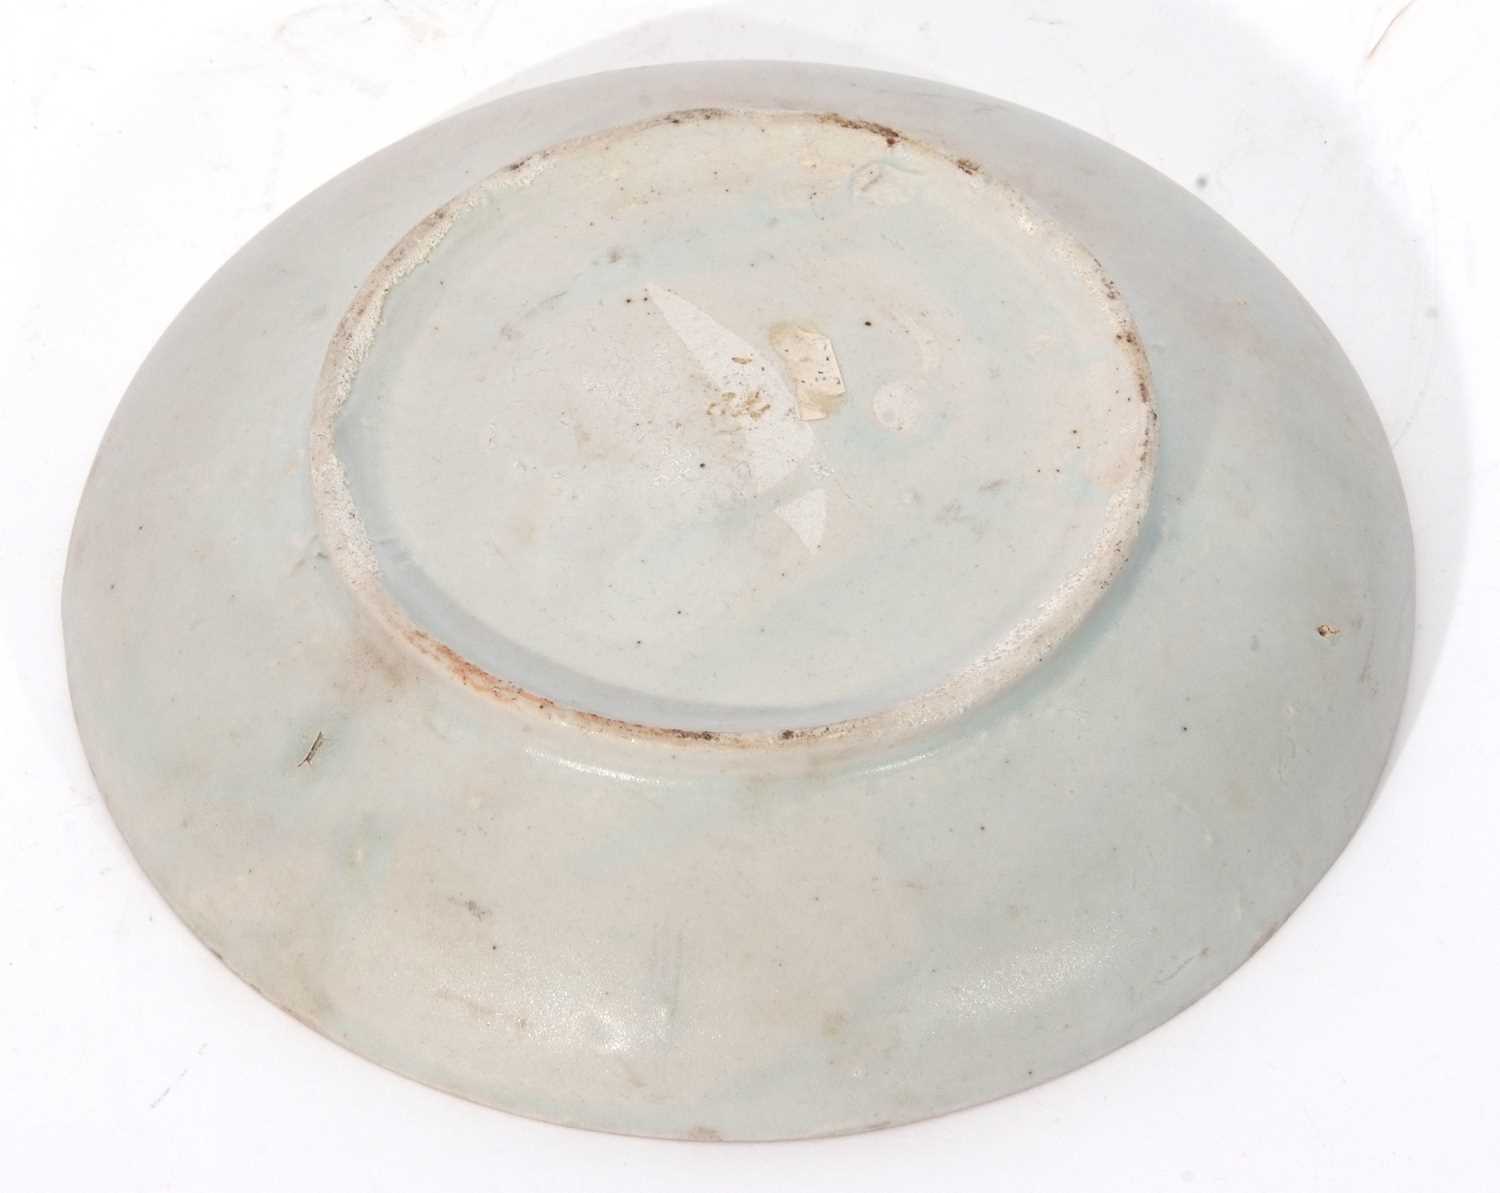 Ming dish, possibly made for the Middle Eastern market, 19cm diam - Image 7 of 8